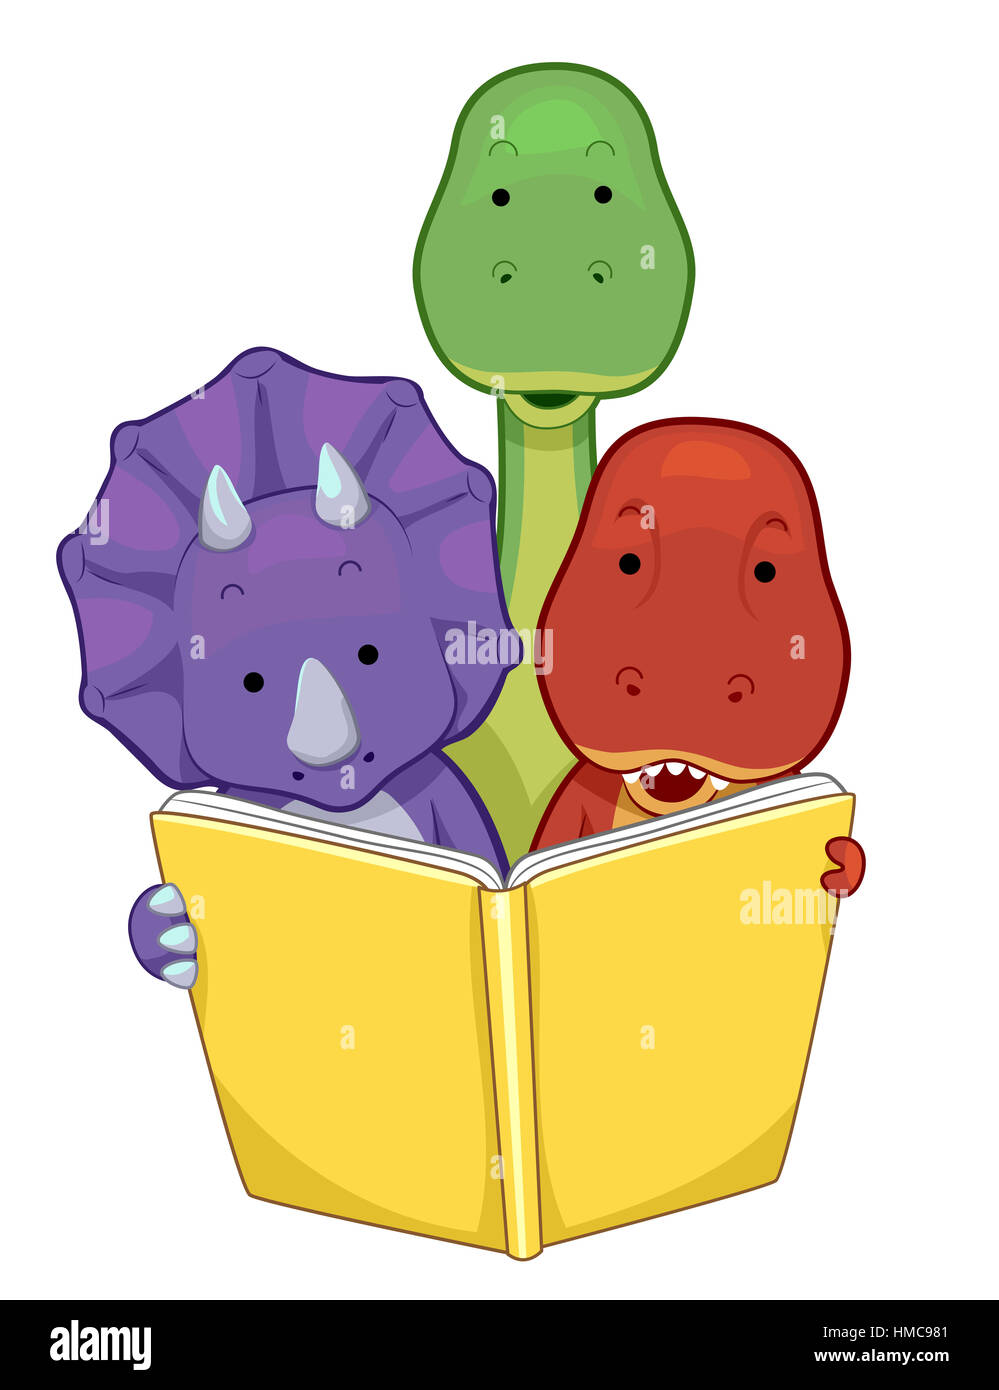 Colorful Animal Illustration of a Baby Triceratops, TRex, and Brontosaurus Reading a Book Together Stock Photo